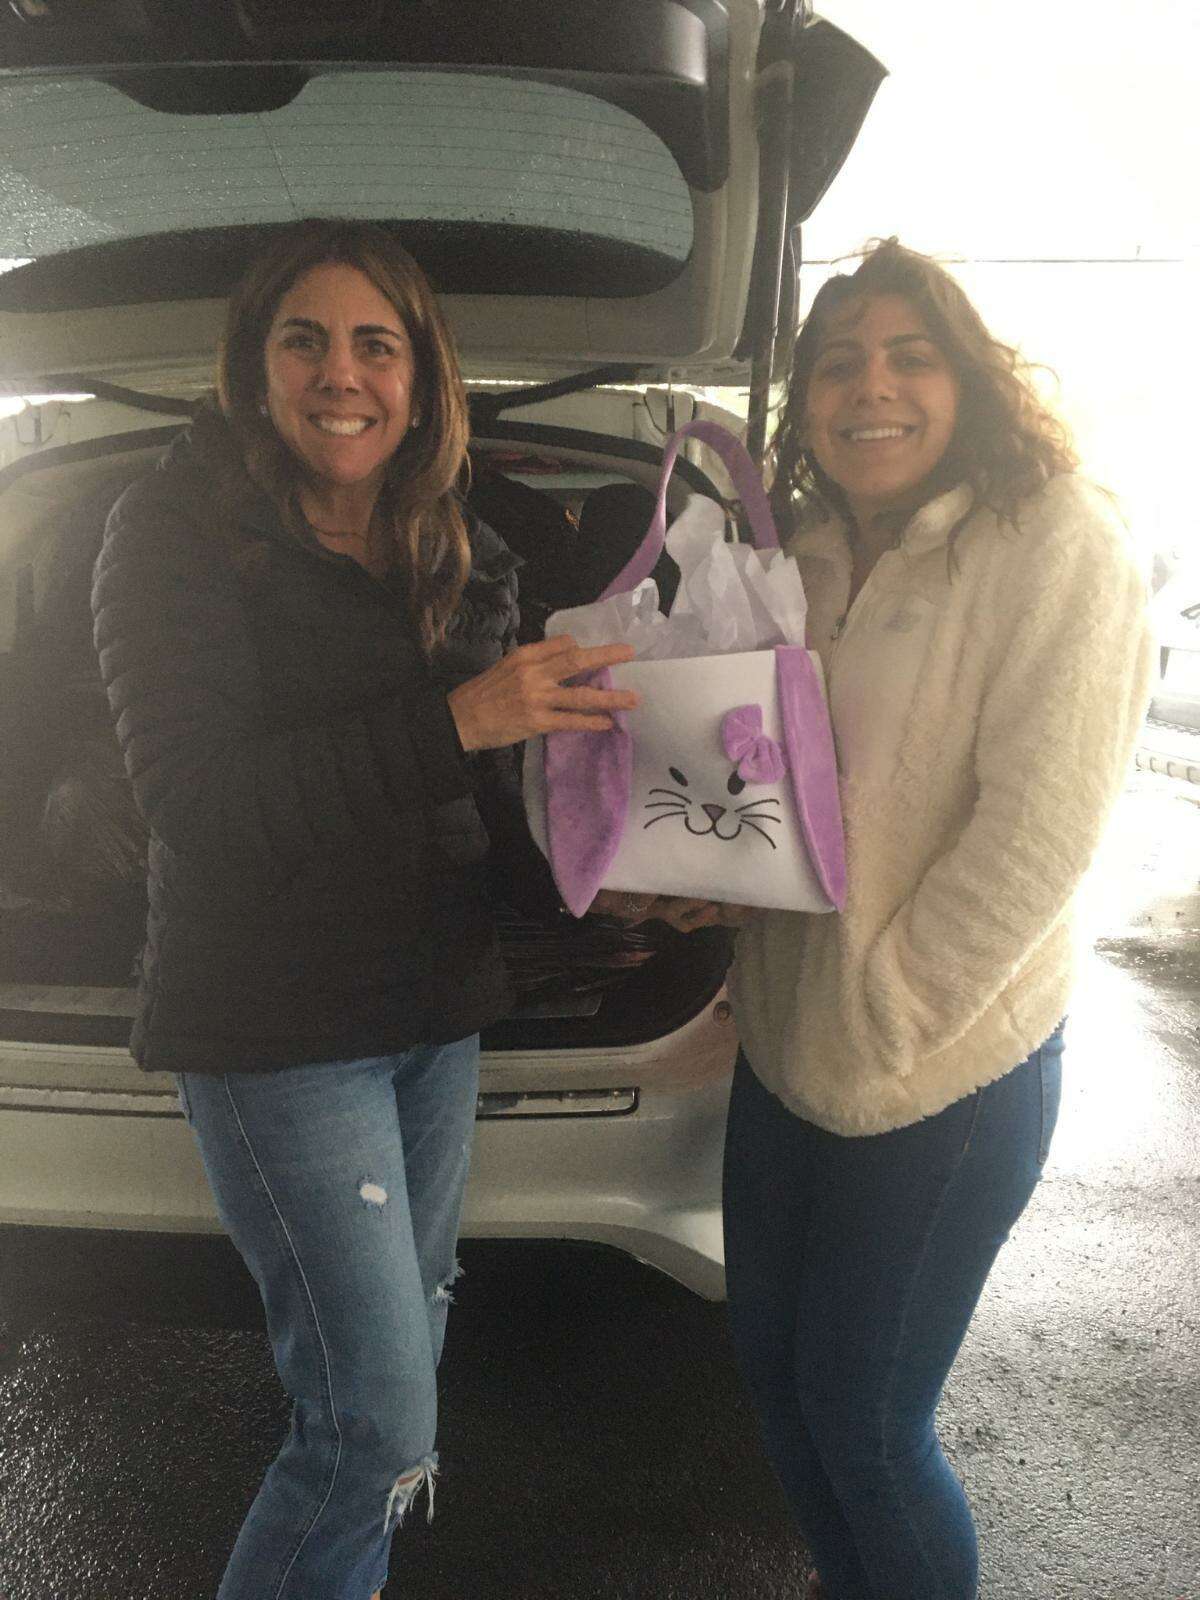 Jessica DiMatteo, right, and her mother, Kim DiMatteo, delivered 94 baskets of goodwill and goodies to three shelters in Norwalk and Stamford. This annual tradition was started more than 21 years ago by the DiMatteo family.